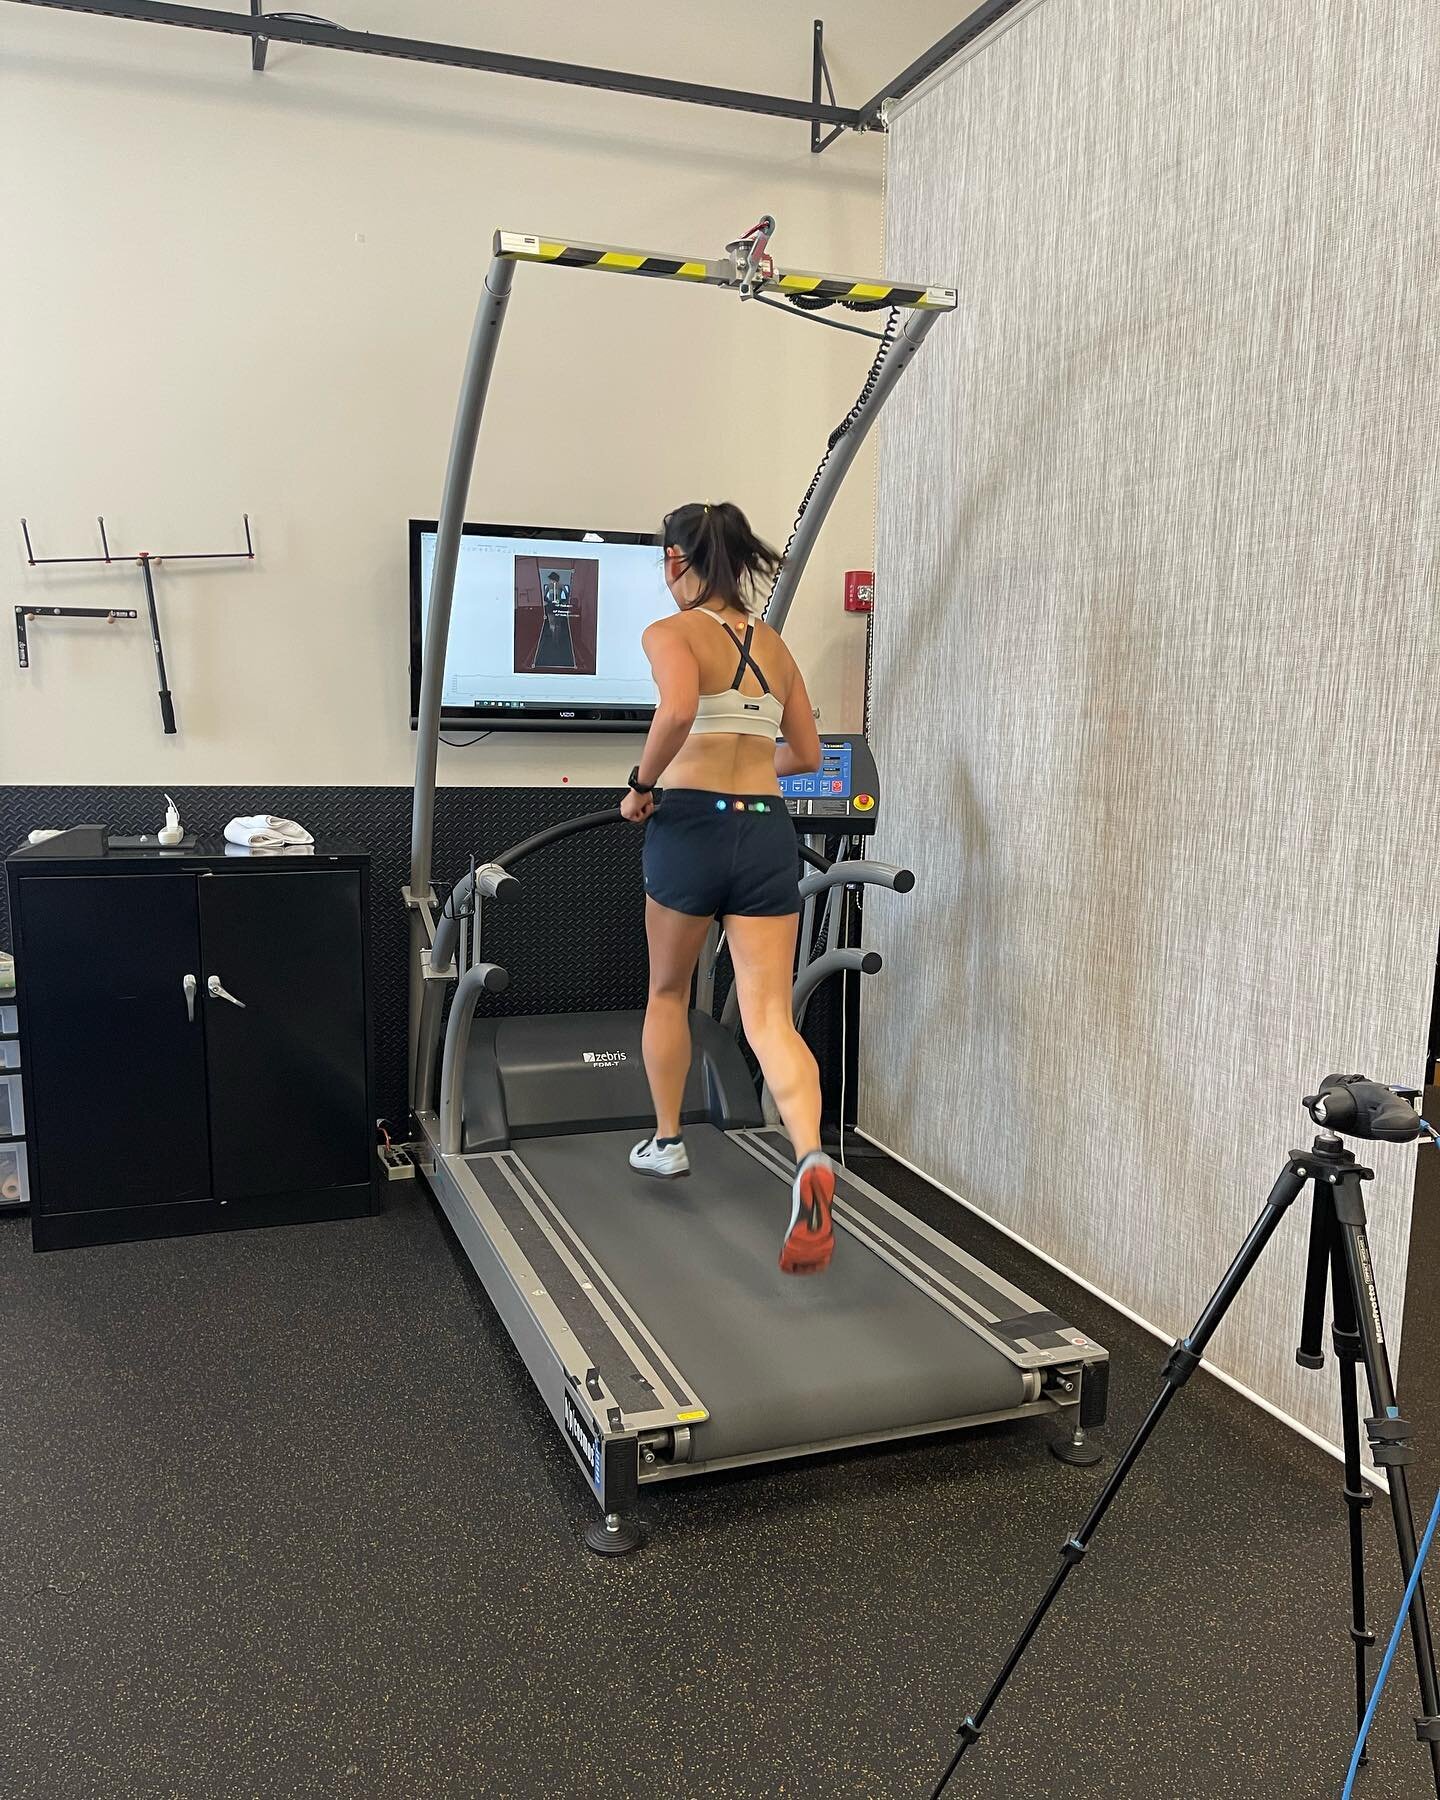 One of our very own is running so much stronger now! 💪🏽 proud of our athletes hard work and dedication to moving better
&bull;&bull;&bull;&bull;&bull;&bull;&bull;
#movement #physicaltherapy #mindfulness #olympia #allthingsolympia